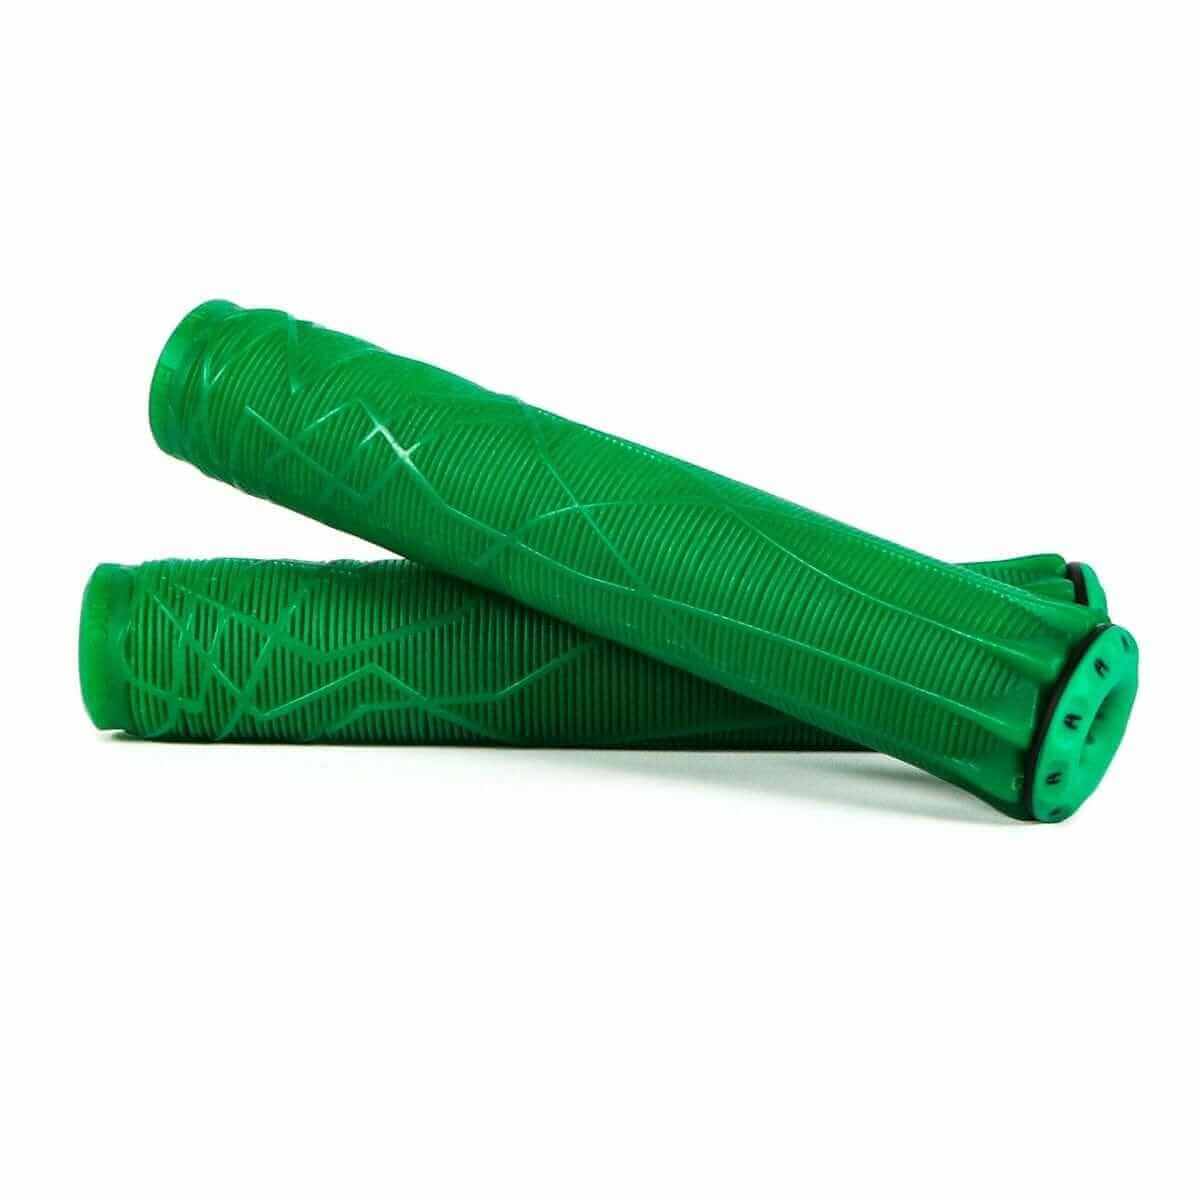 Ethic DTC Rubber Grips |GRIPS |$13.99 |TSP The Shop | Ethic DTC Rubber Grips | The Shop Pro Scooter Lab